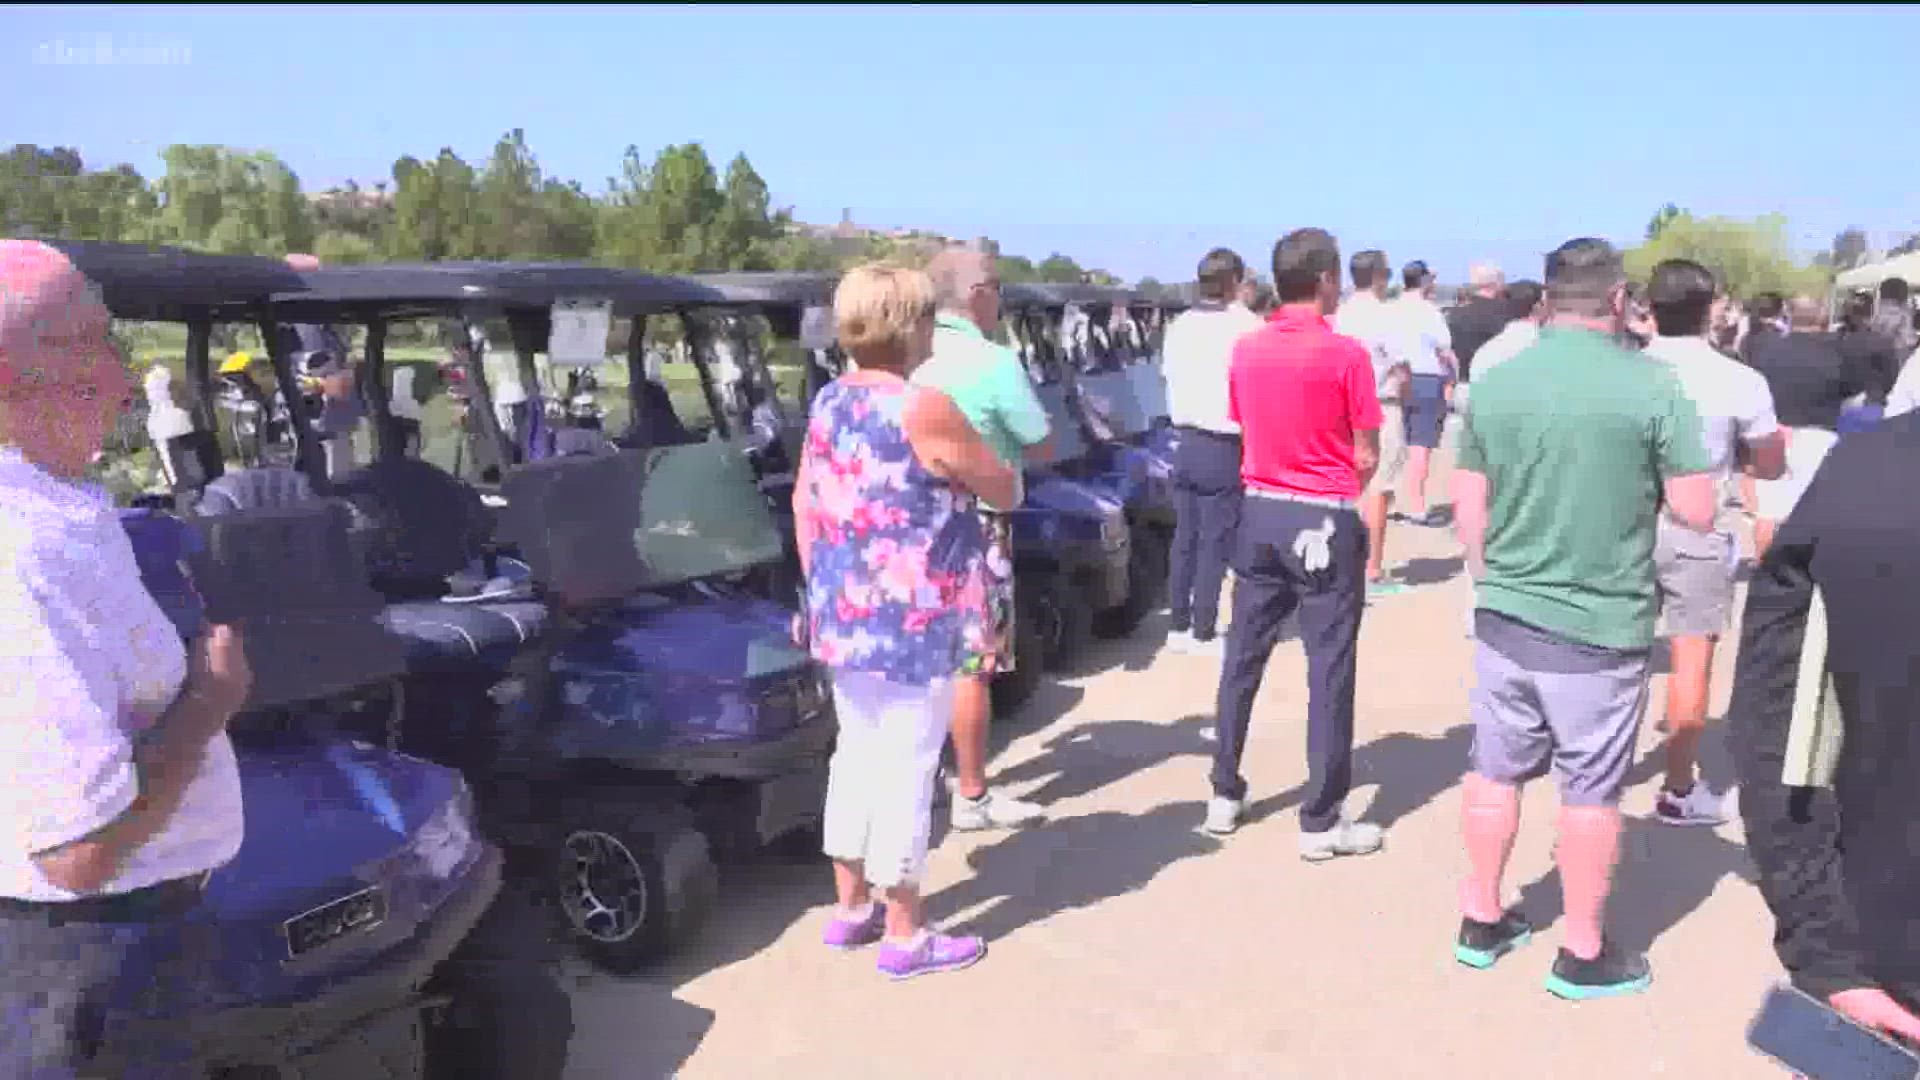 On Saturday, a fundraiser, golf tournament took place to help raise money for the families, and offer services including mental health support.